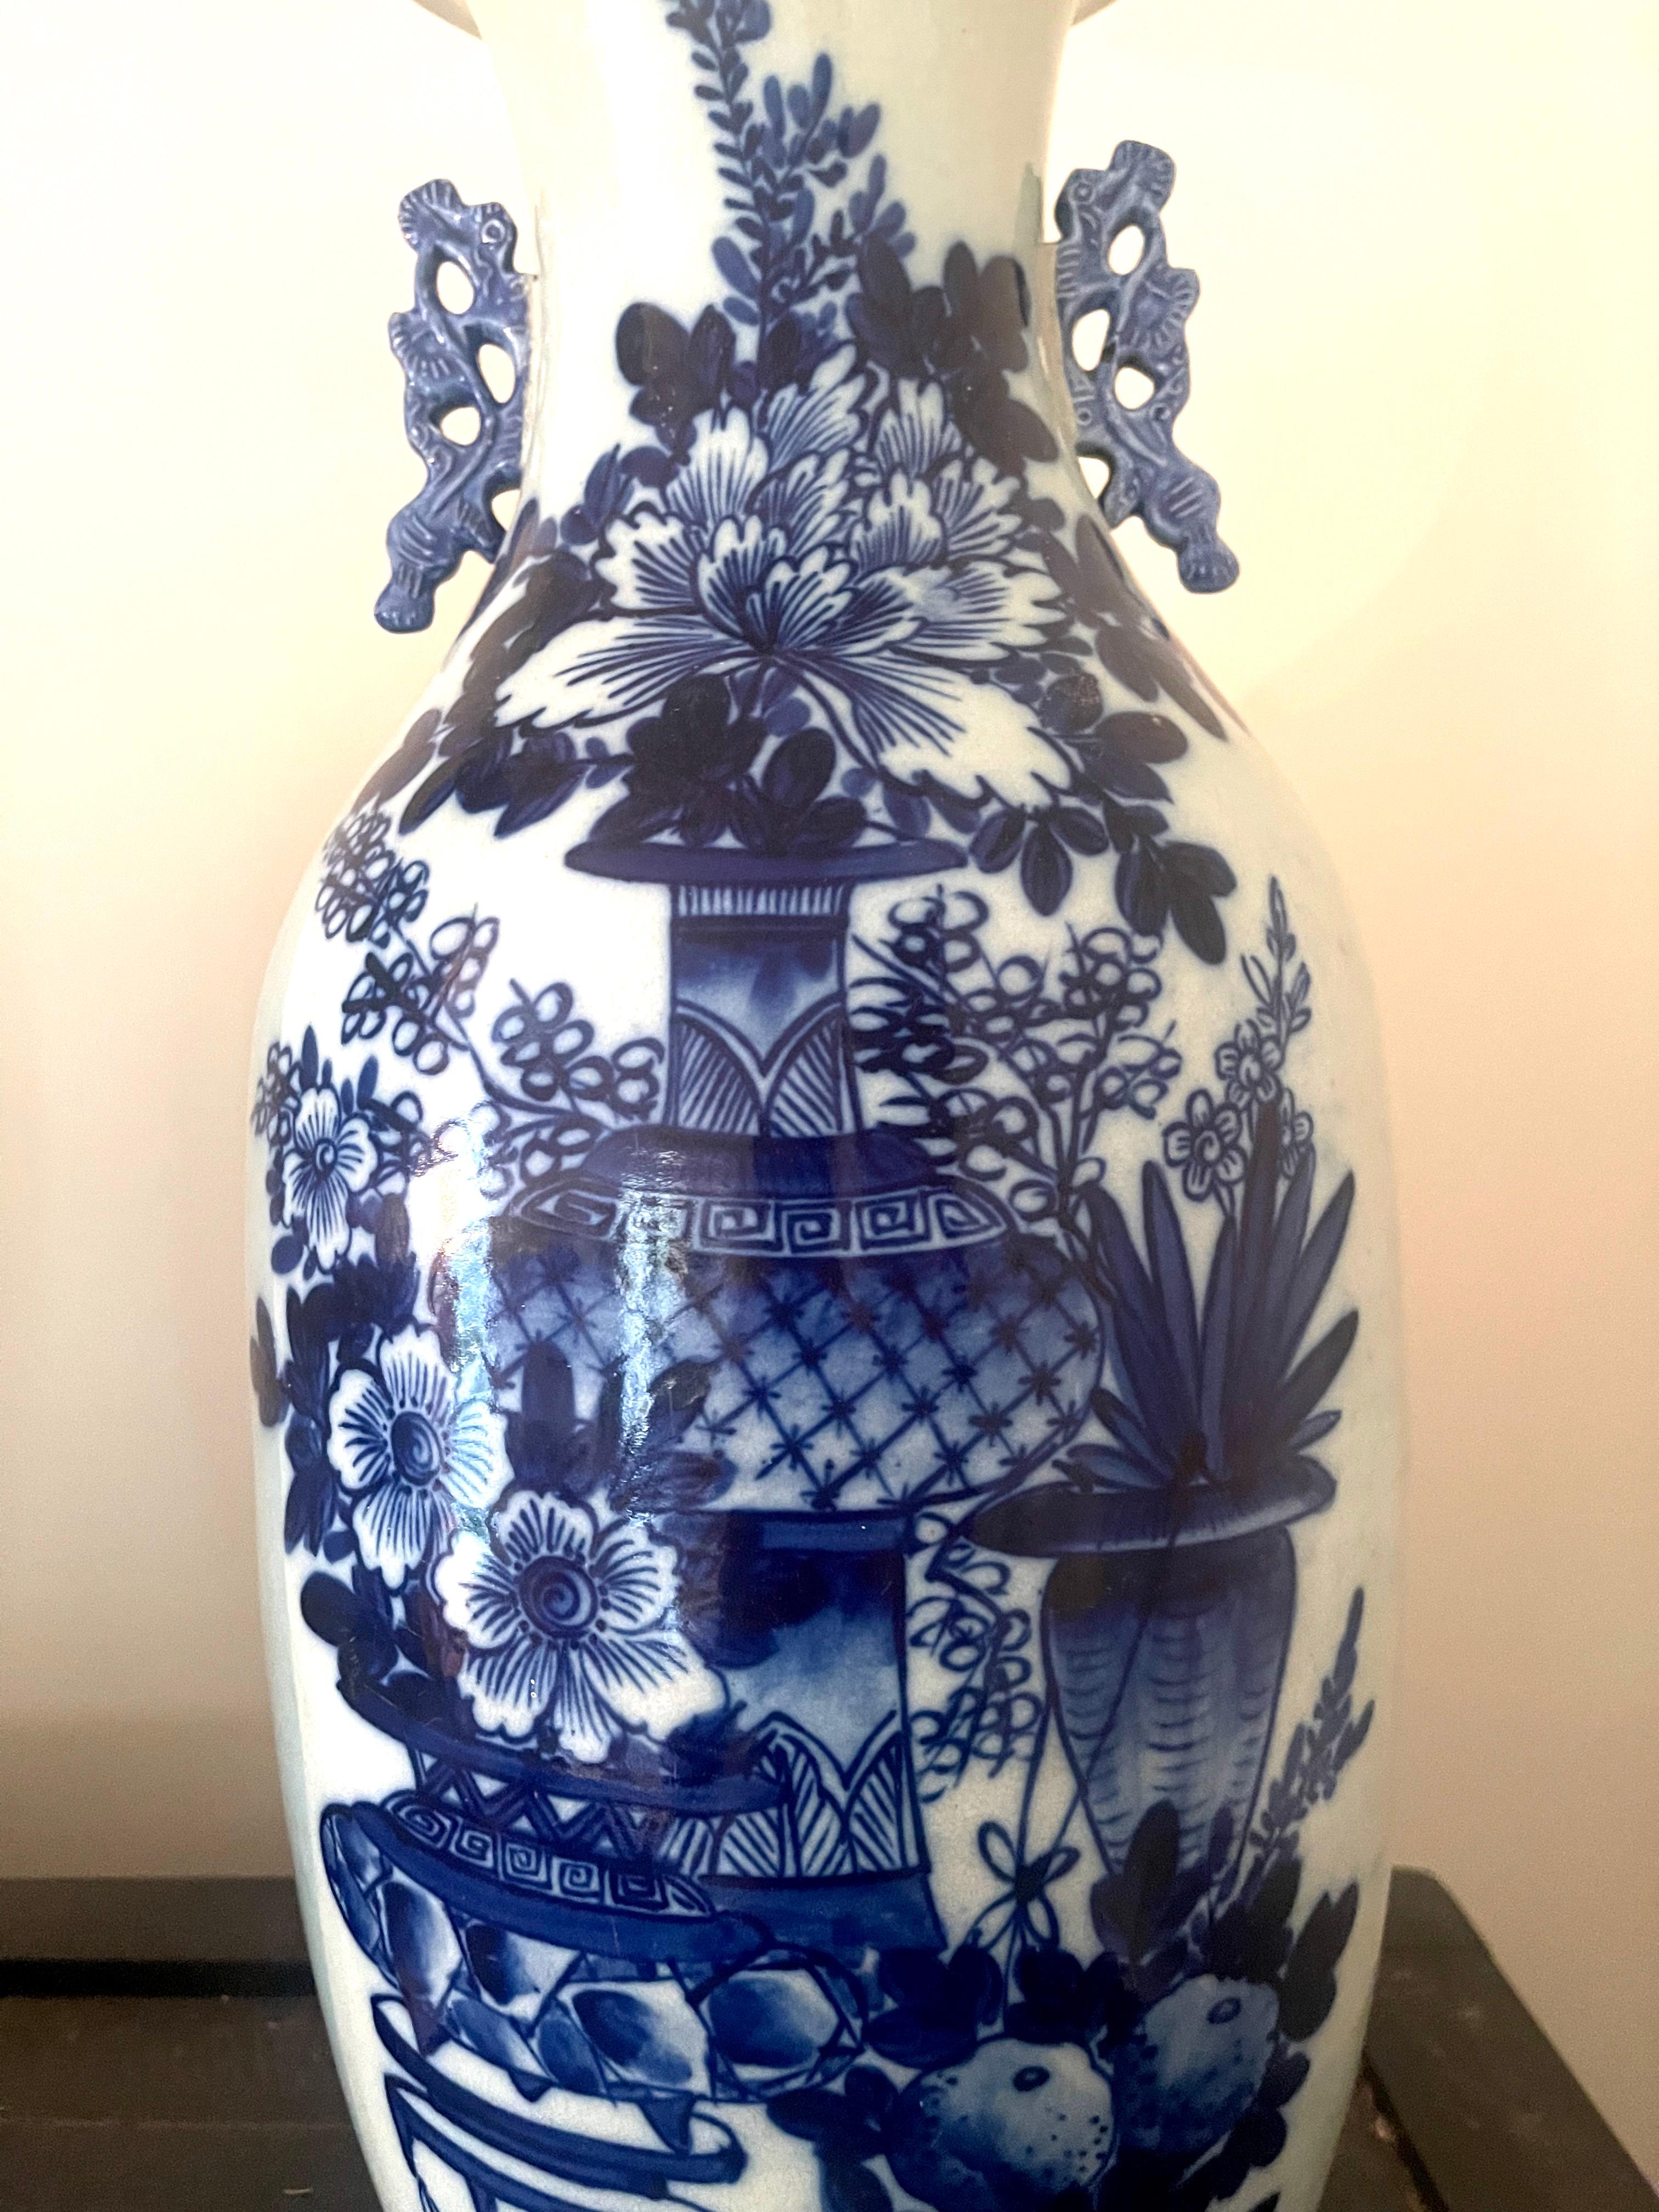 A fine antique 19th century Chinese porcelain large baluster vase decorated with various flowers and objects in low relief and underglaze cobalt blue within a white-glazed ground. The vase has molded stylized handles in cobalt blue to either side of